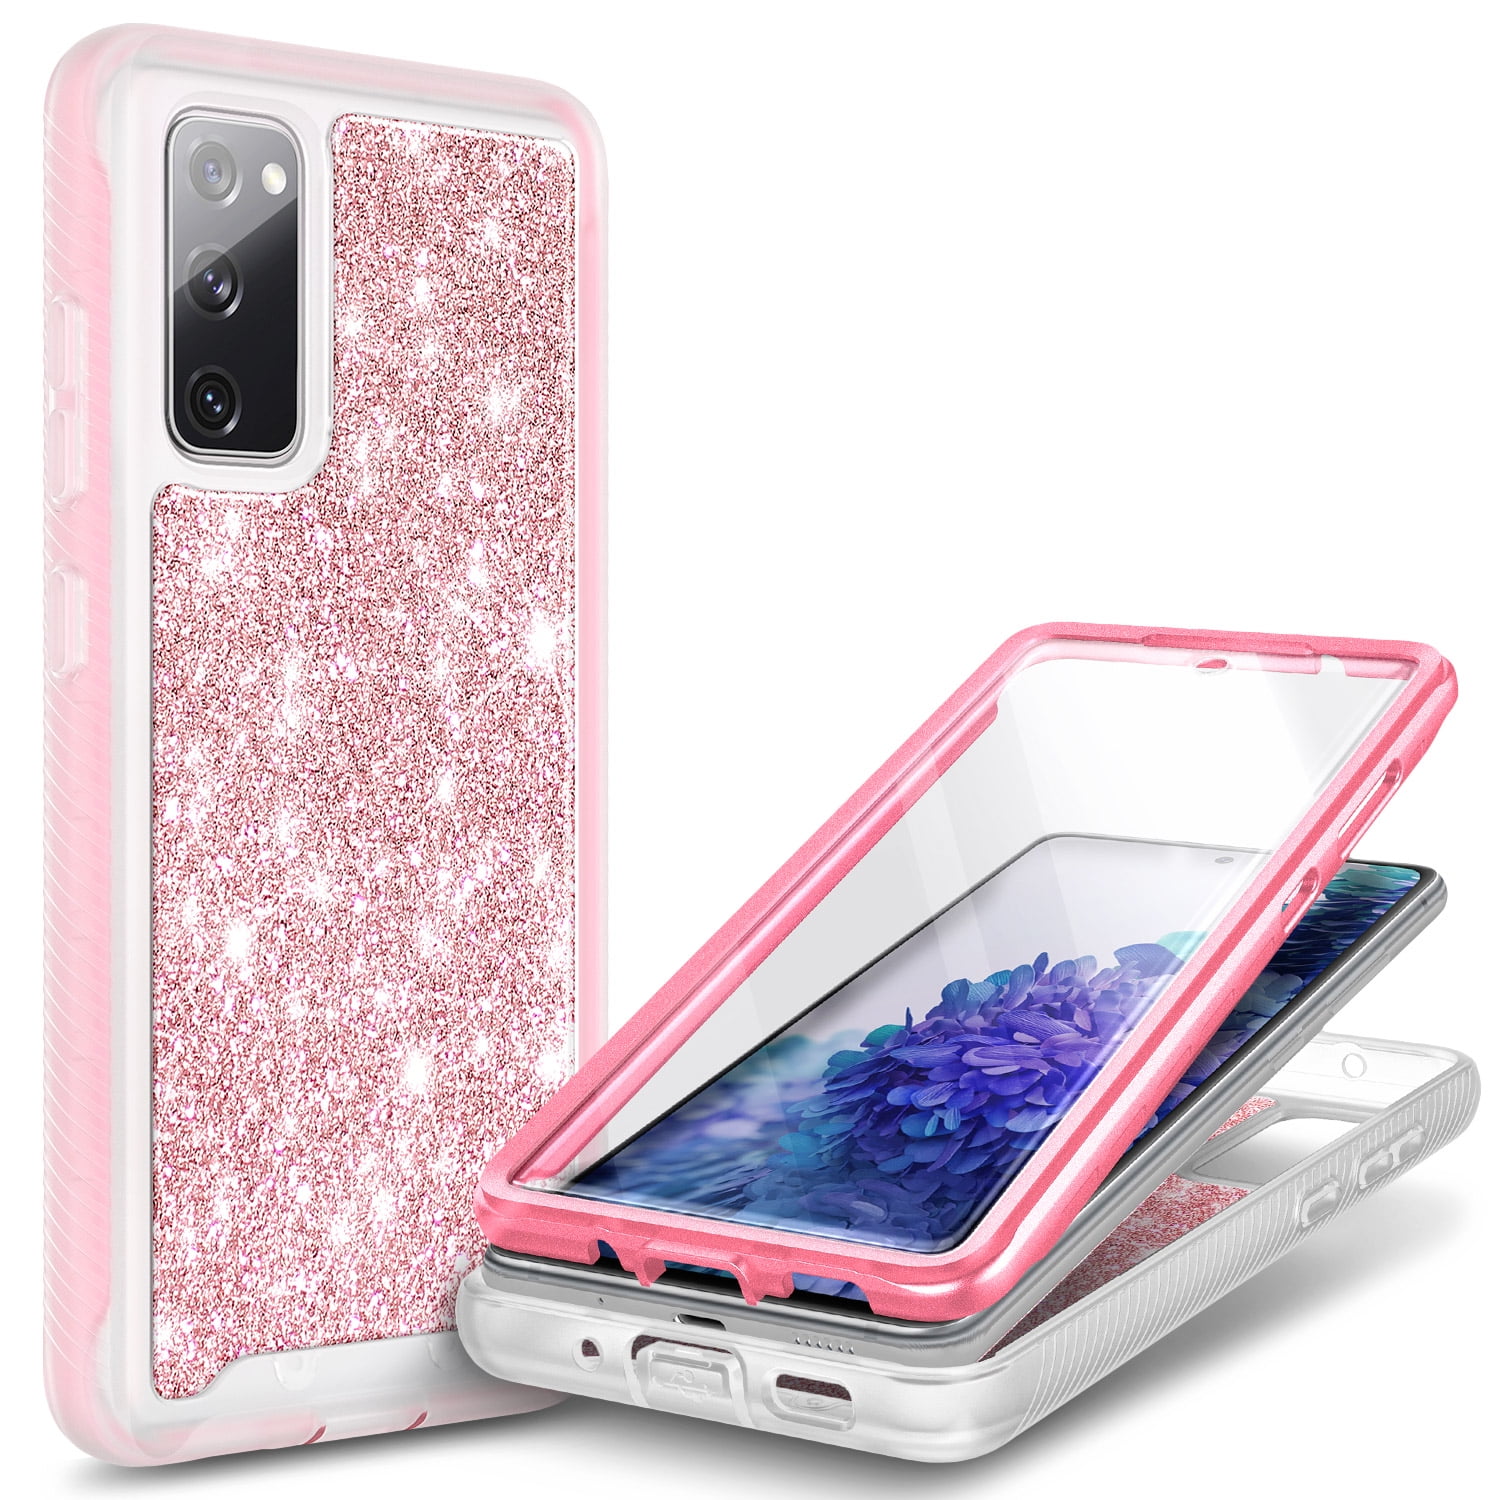 Built in Screen Protector 360° Full Body Heavy Duty Protective Shockproof IP68 Underwater Case for Samsung Galaxy S20 FE 5G 6.5inch Pink ANTSHARE for Samsung Galaxy S20 FE 5G Case Waterproof